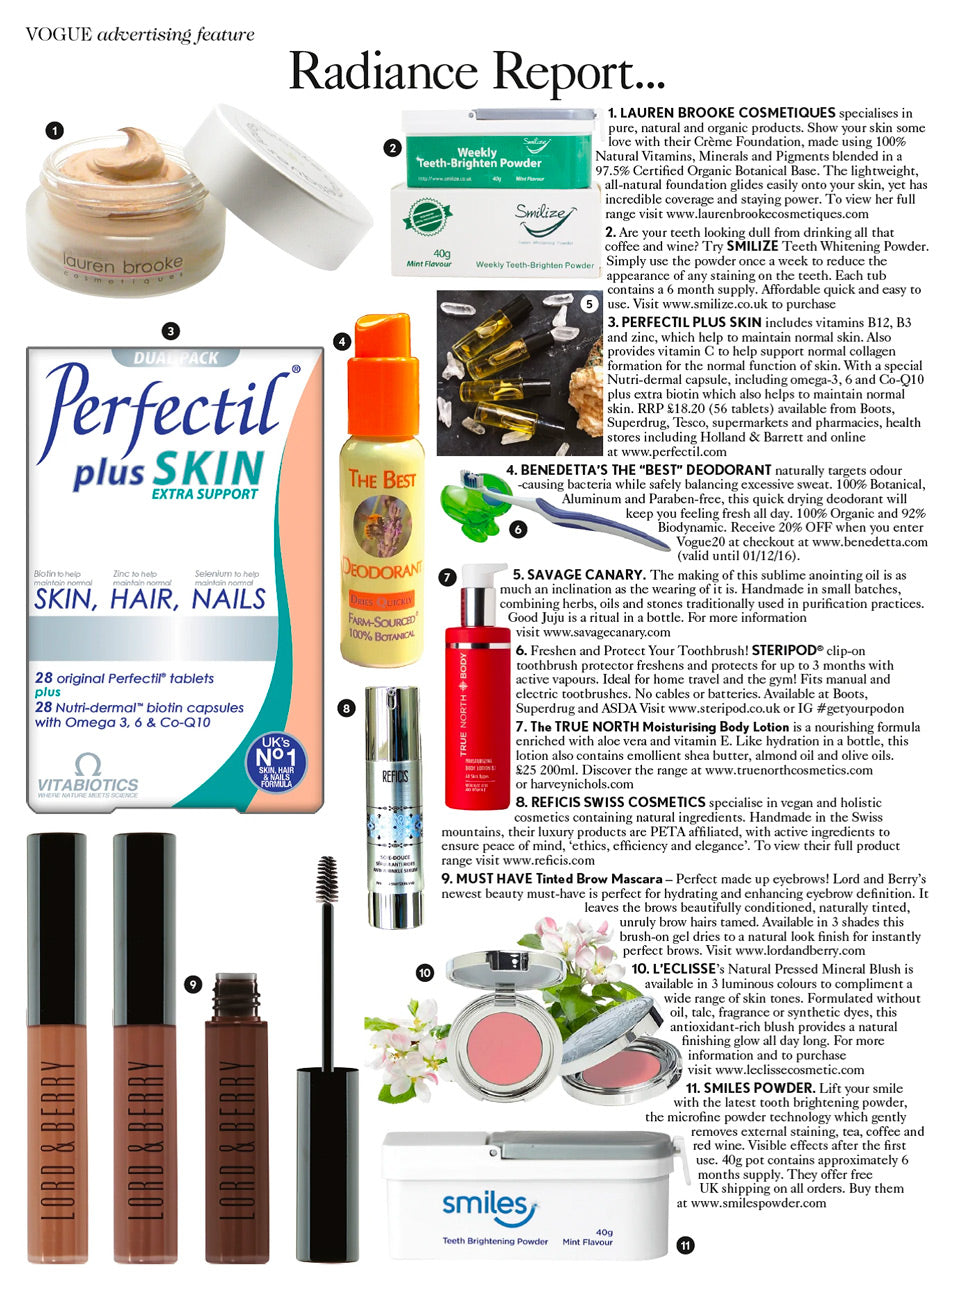 VOGUE Advertising Feature "The Radiance Report" featuring Benedetta's The "Best" Deodorant